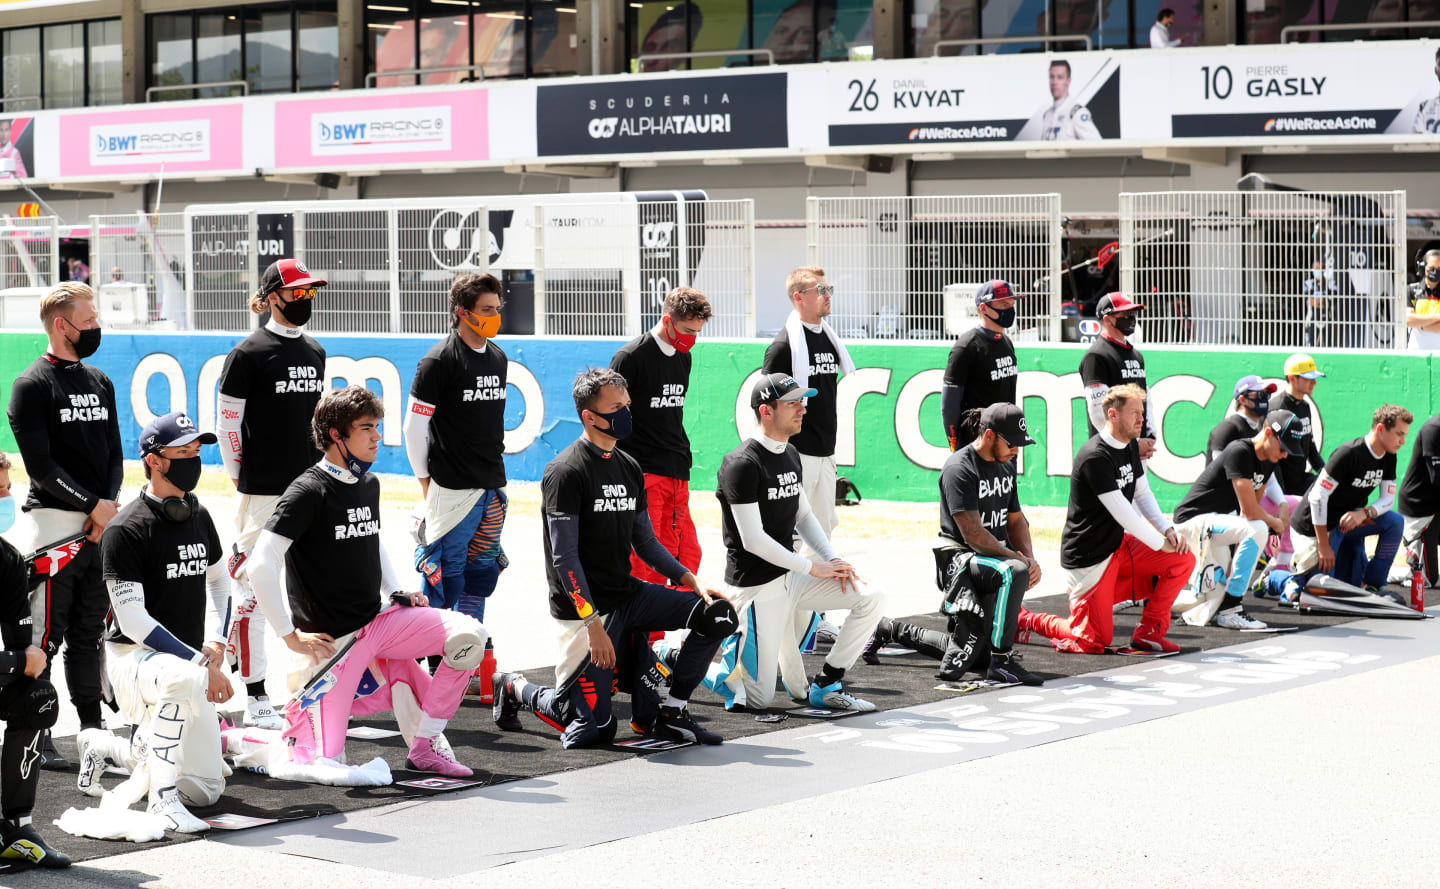 BARCELONA, SPAIN - AUGUST 16: The F1 drivers take a knee on the grid in support of the Black Lives